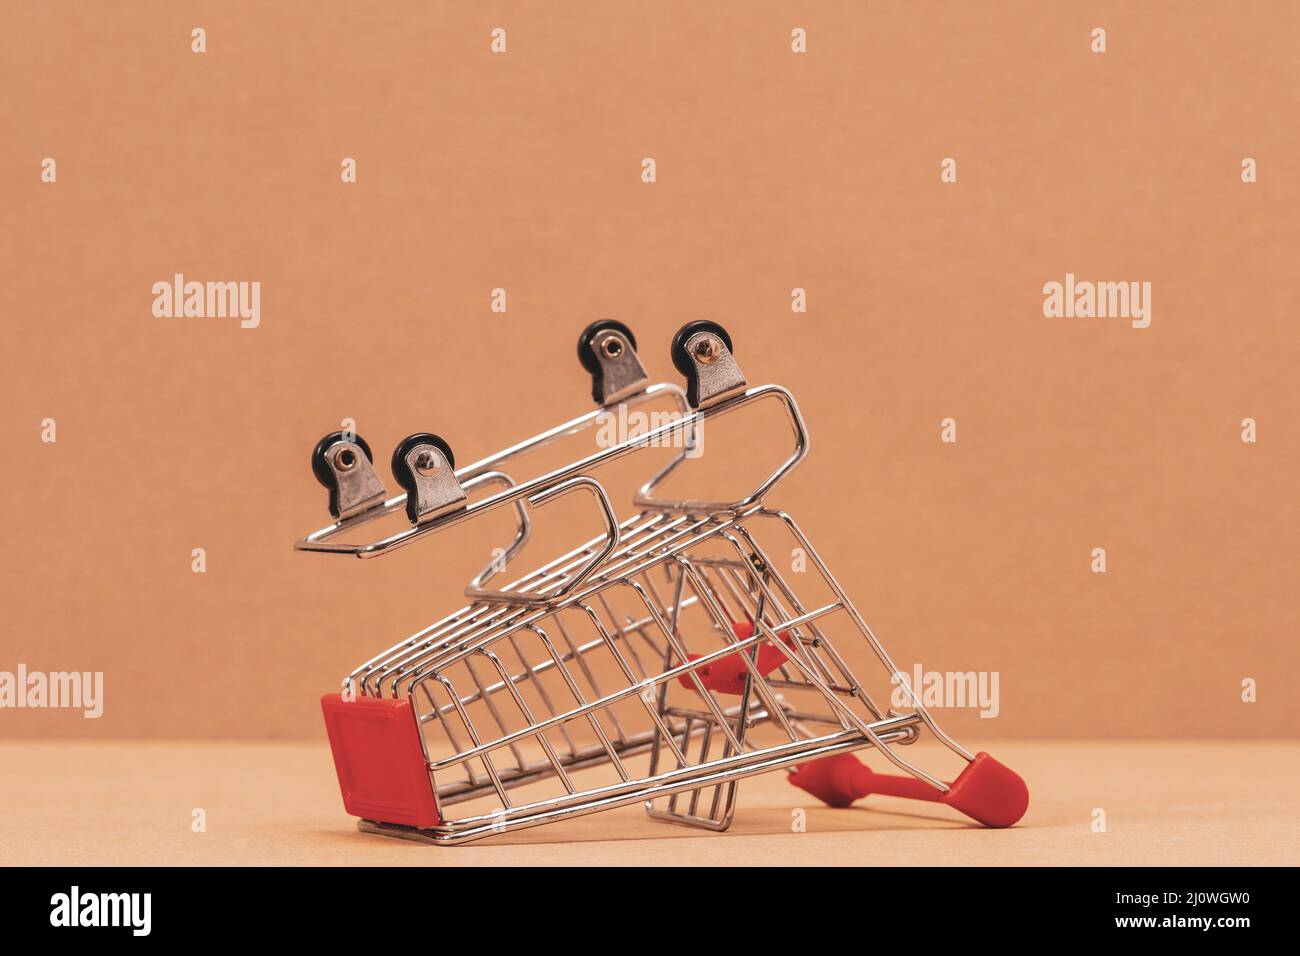 Shopping cart is upturned Stock Photo